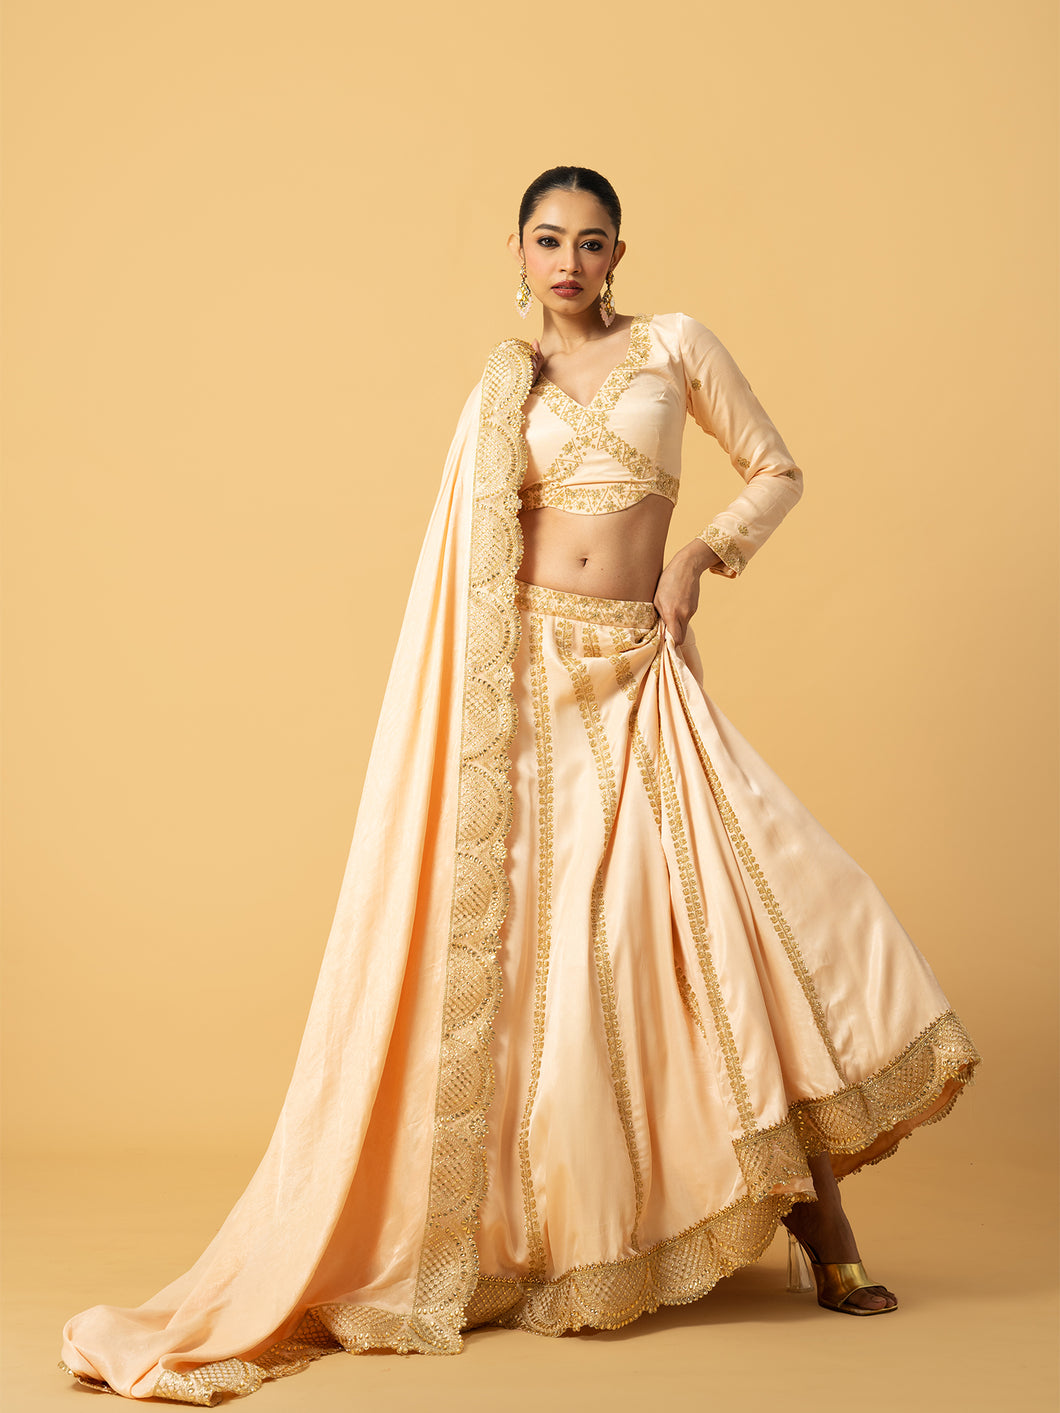 Peach modal satin full sleeve lehenga with hand embroidered work and lace on dupatta